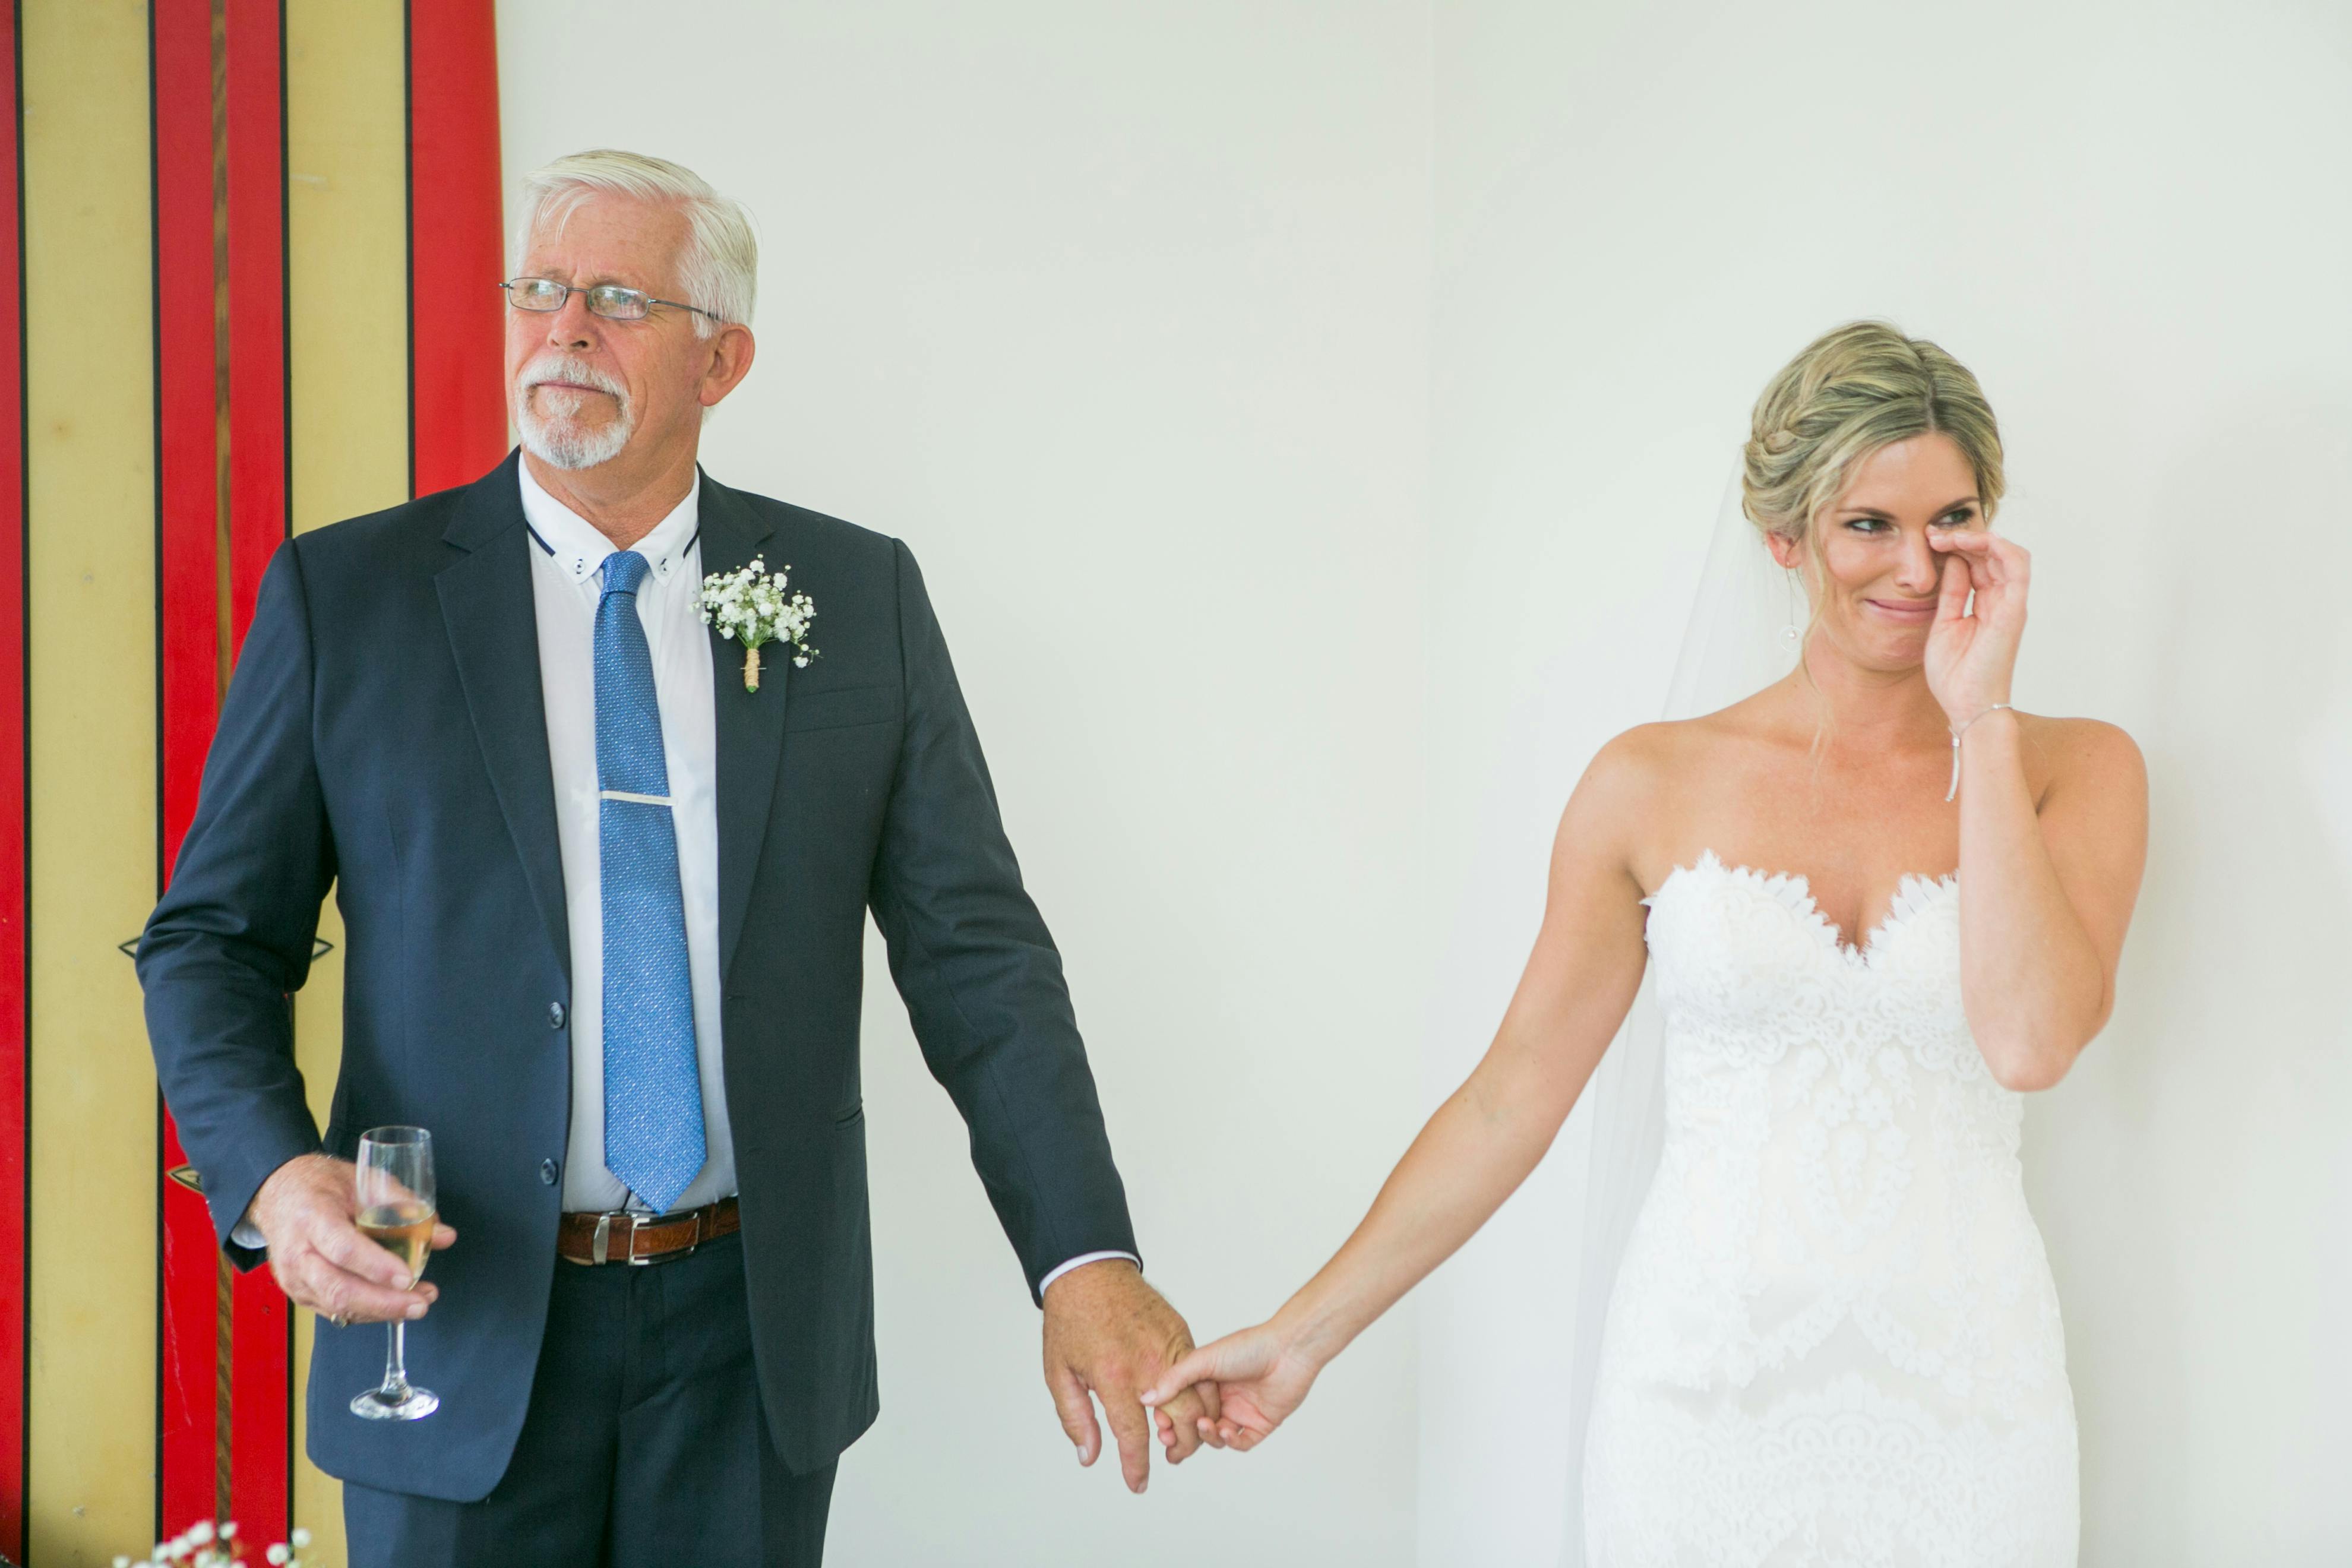 Emotional bride with her father during wedding celebration | Source: Pexels